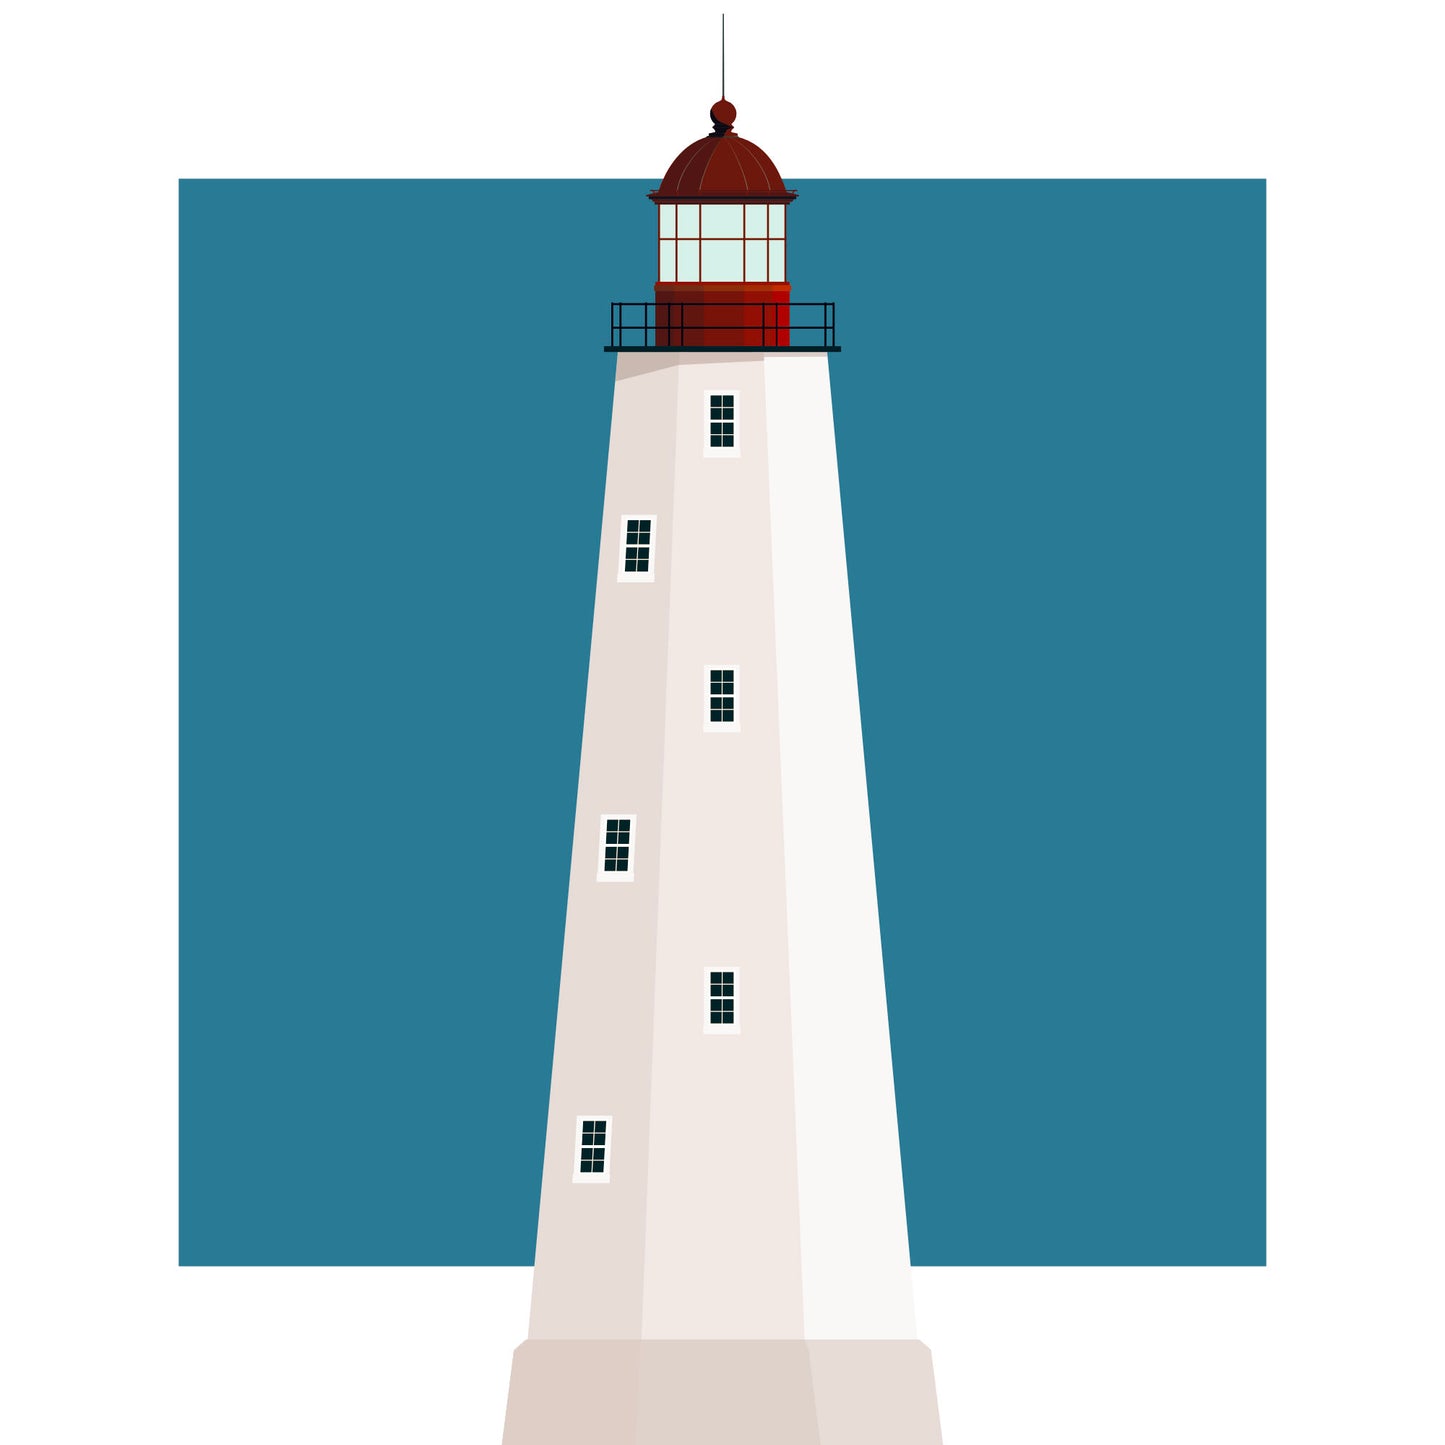 Illustration of the Sandy Hook lighthouse, New Jersey, USA. On a white background with aqua blue square as a backdrop.